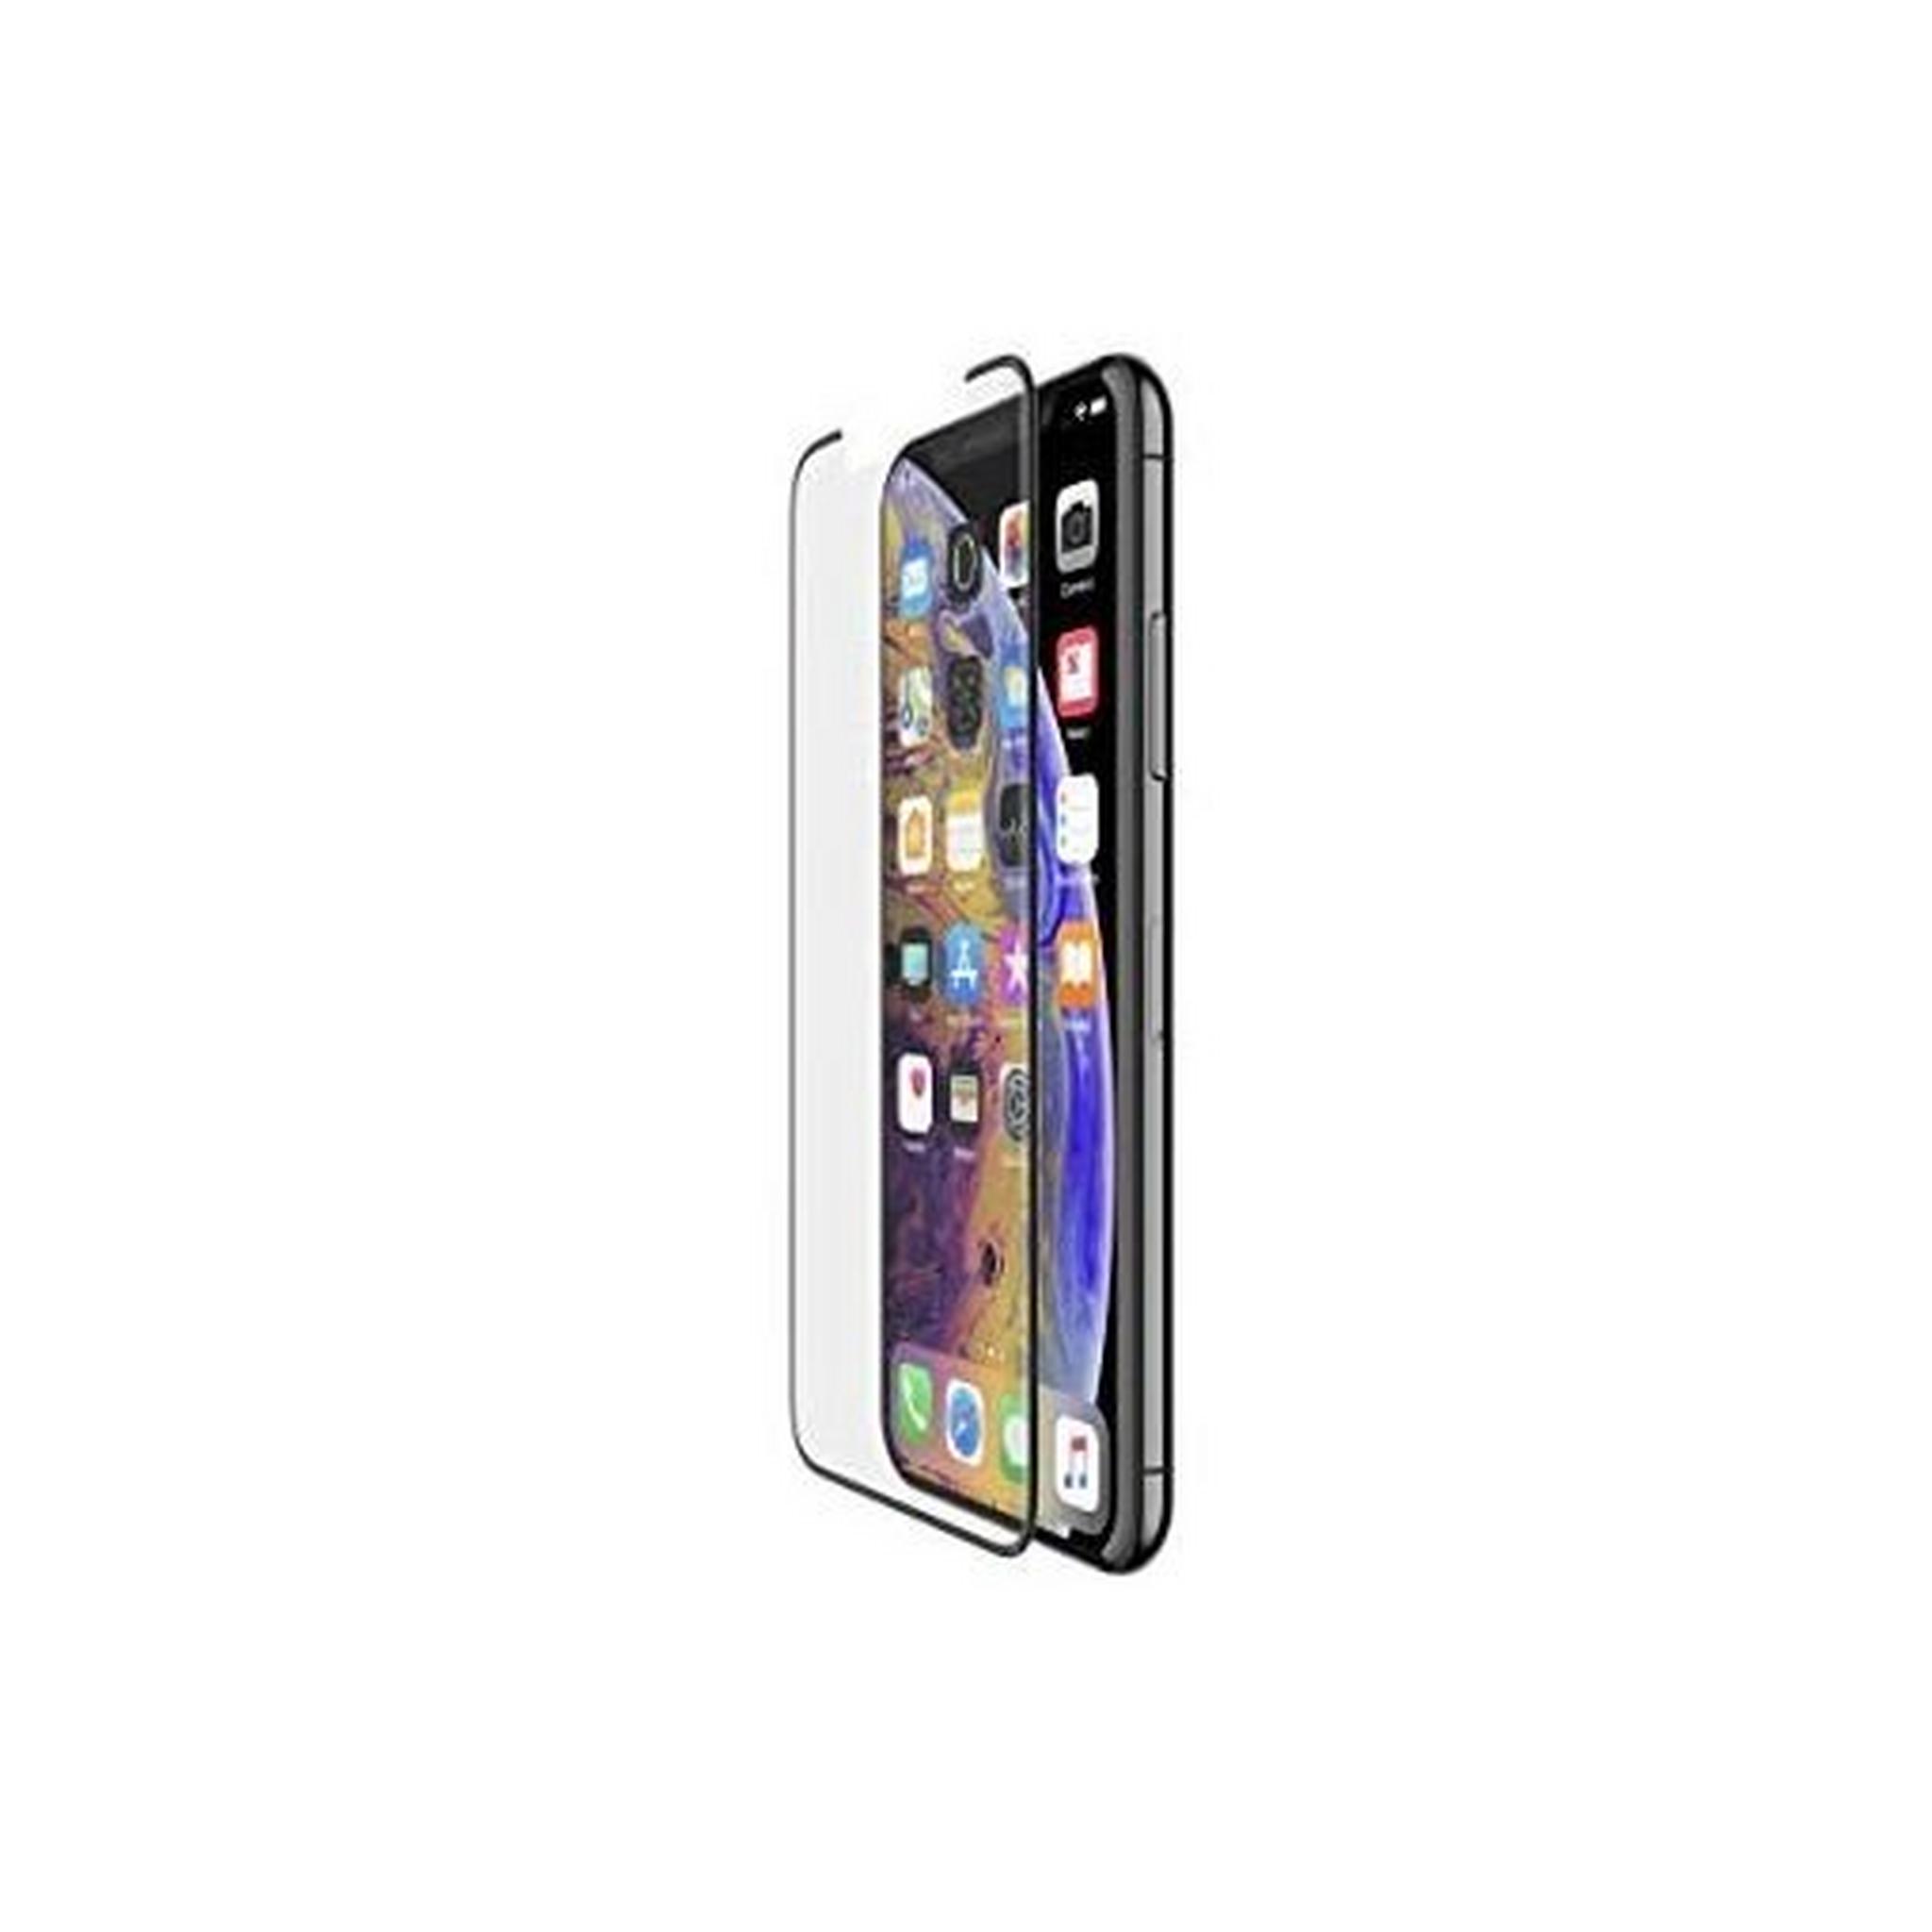 Belkin Tempered Glass Screen Protector For iPhone 11 - Black